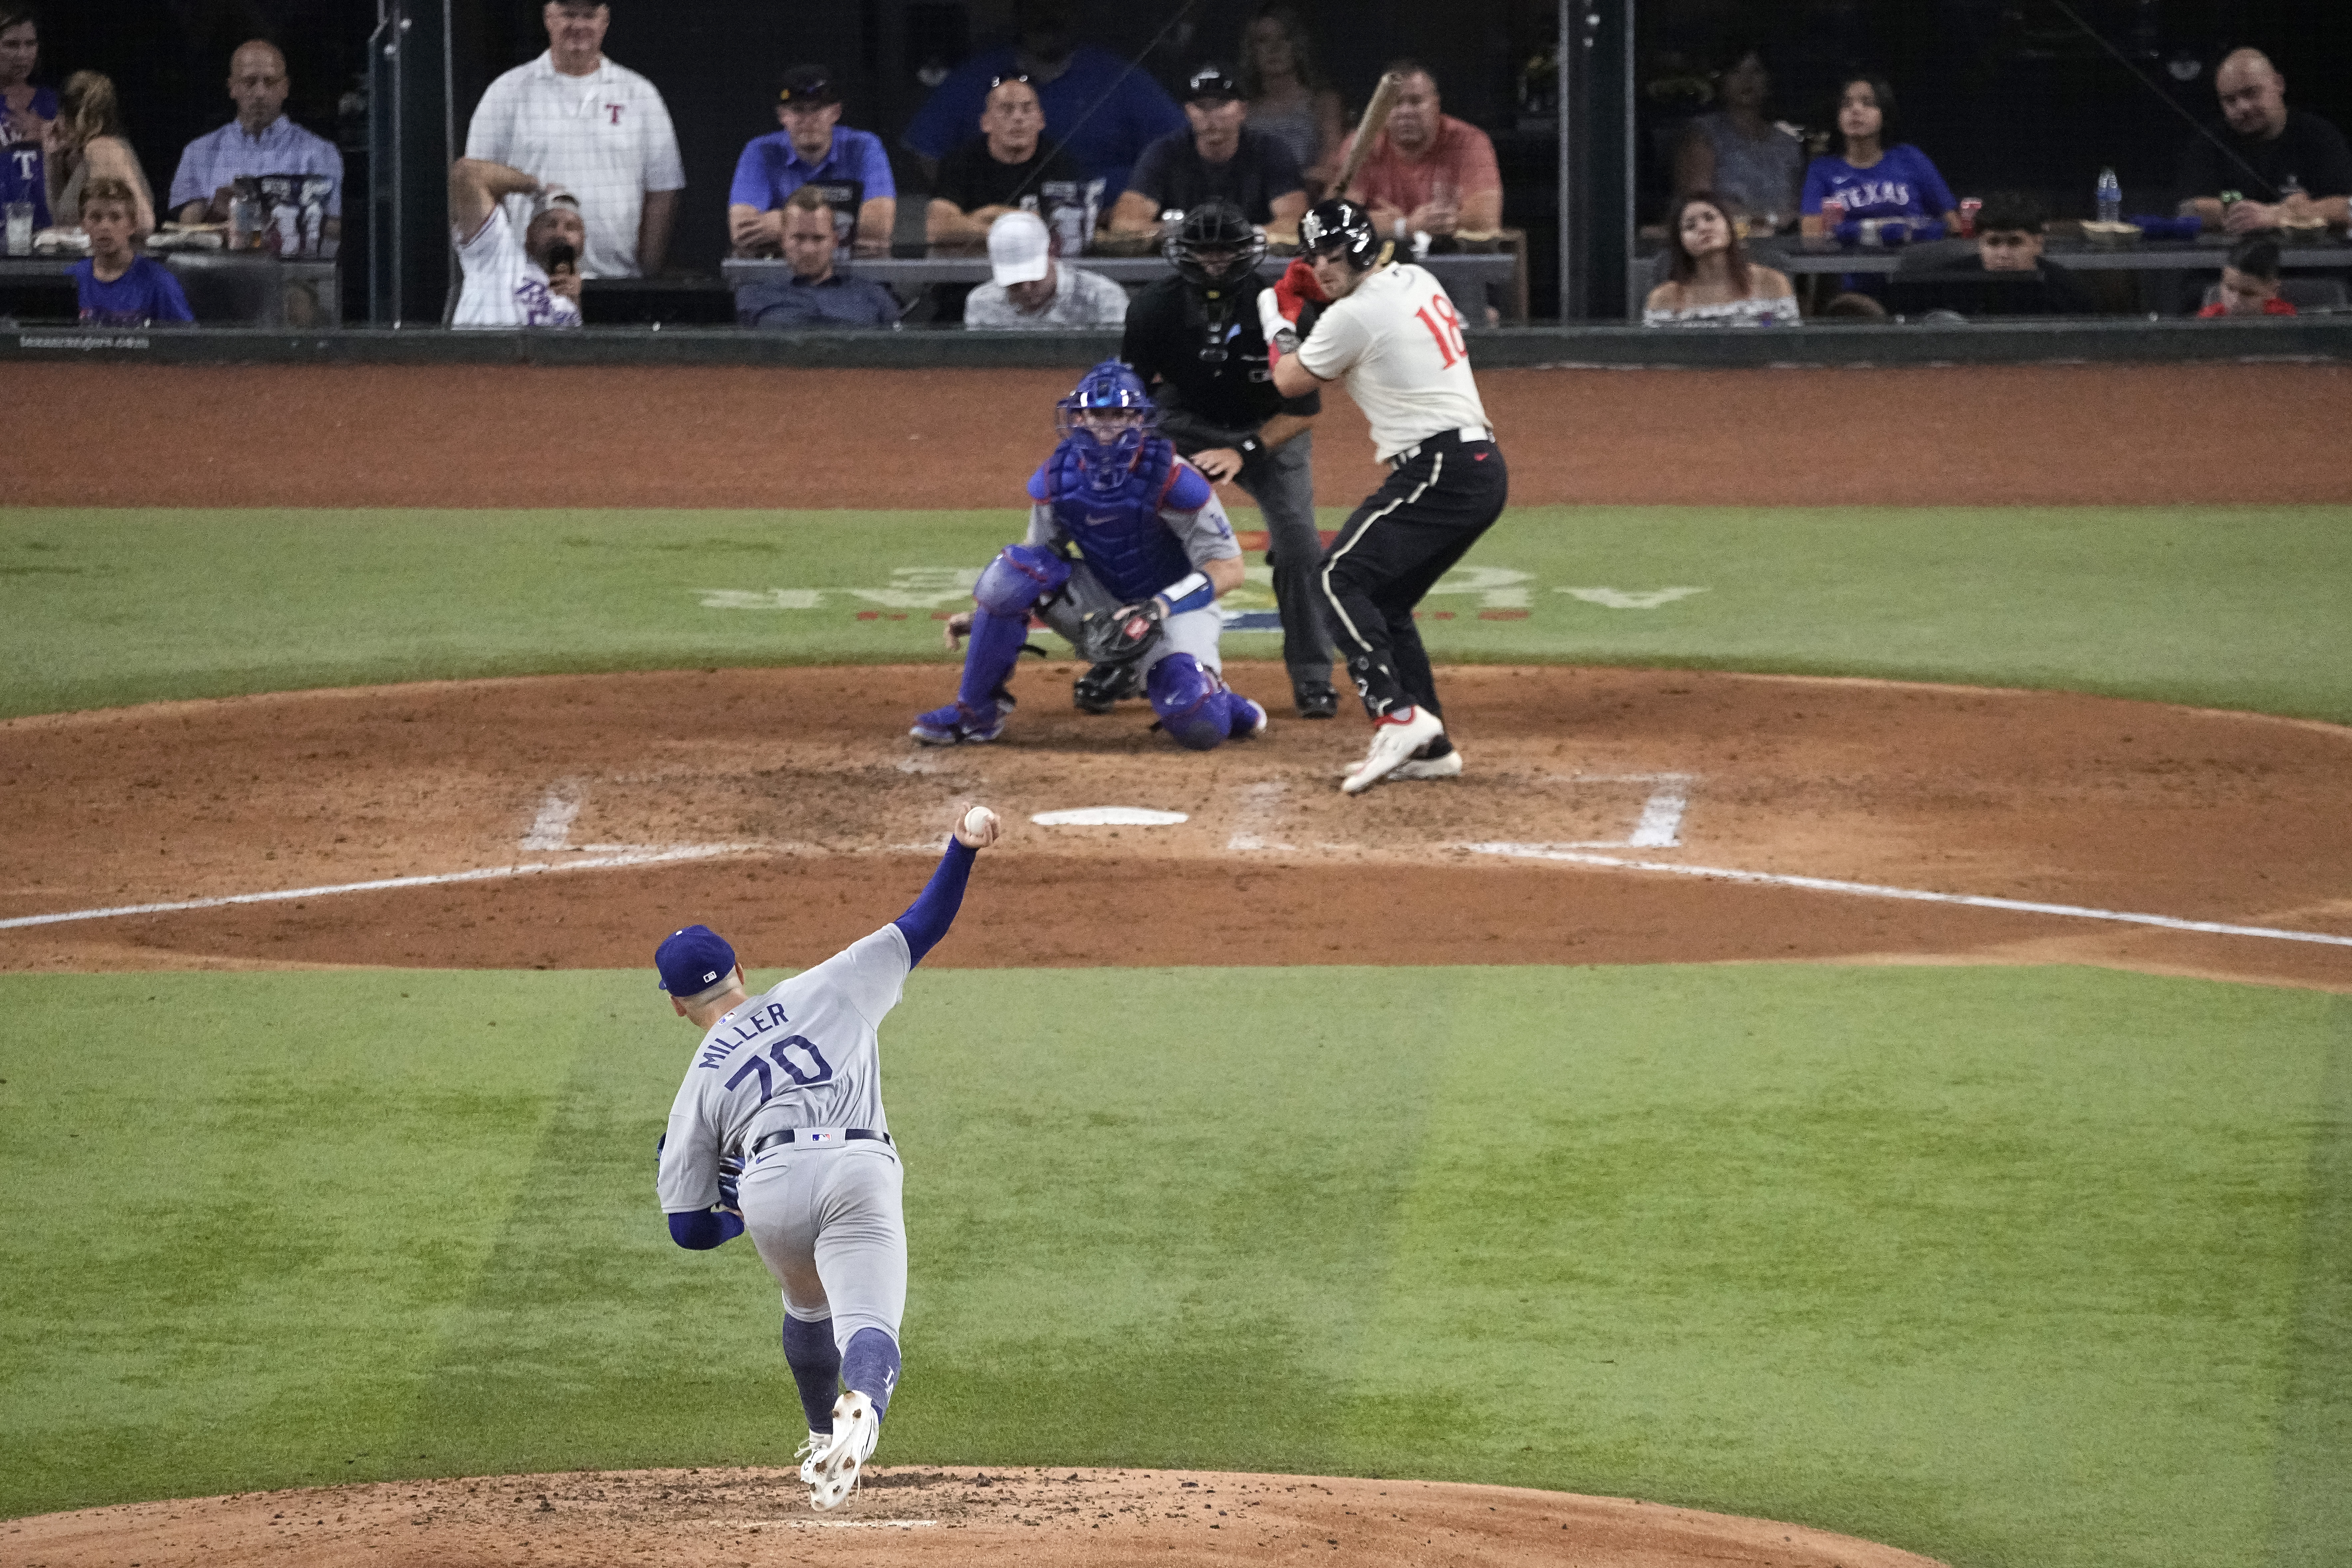 Dodgers beat Texas 11-5 in return to Globe Life Field, where they